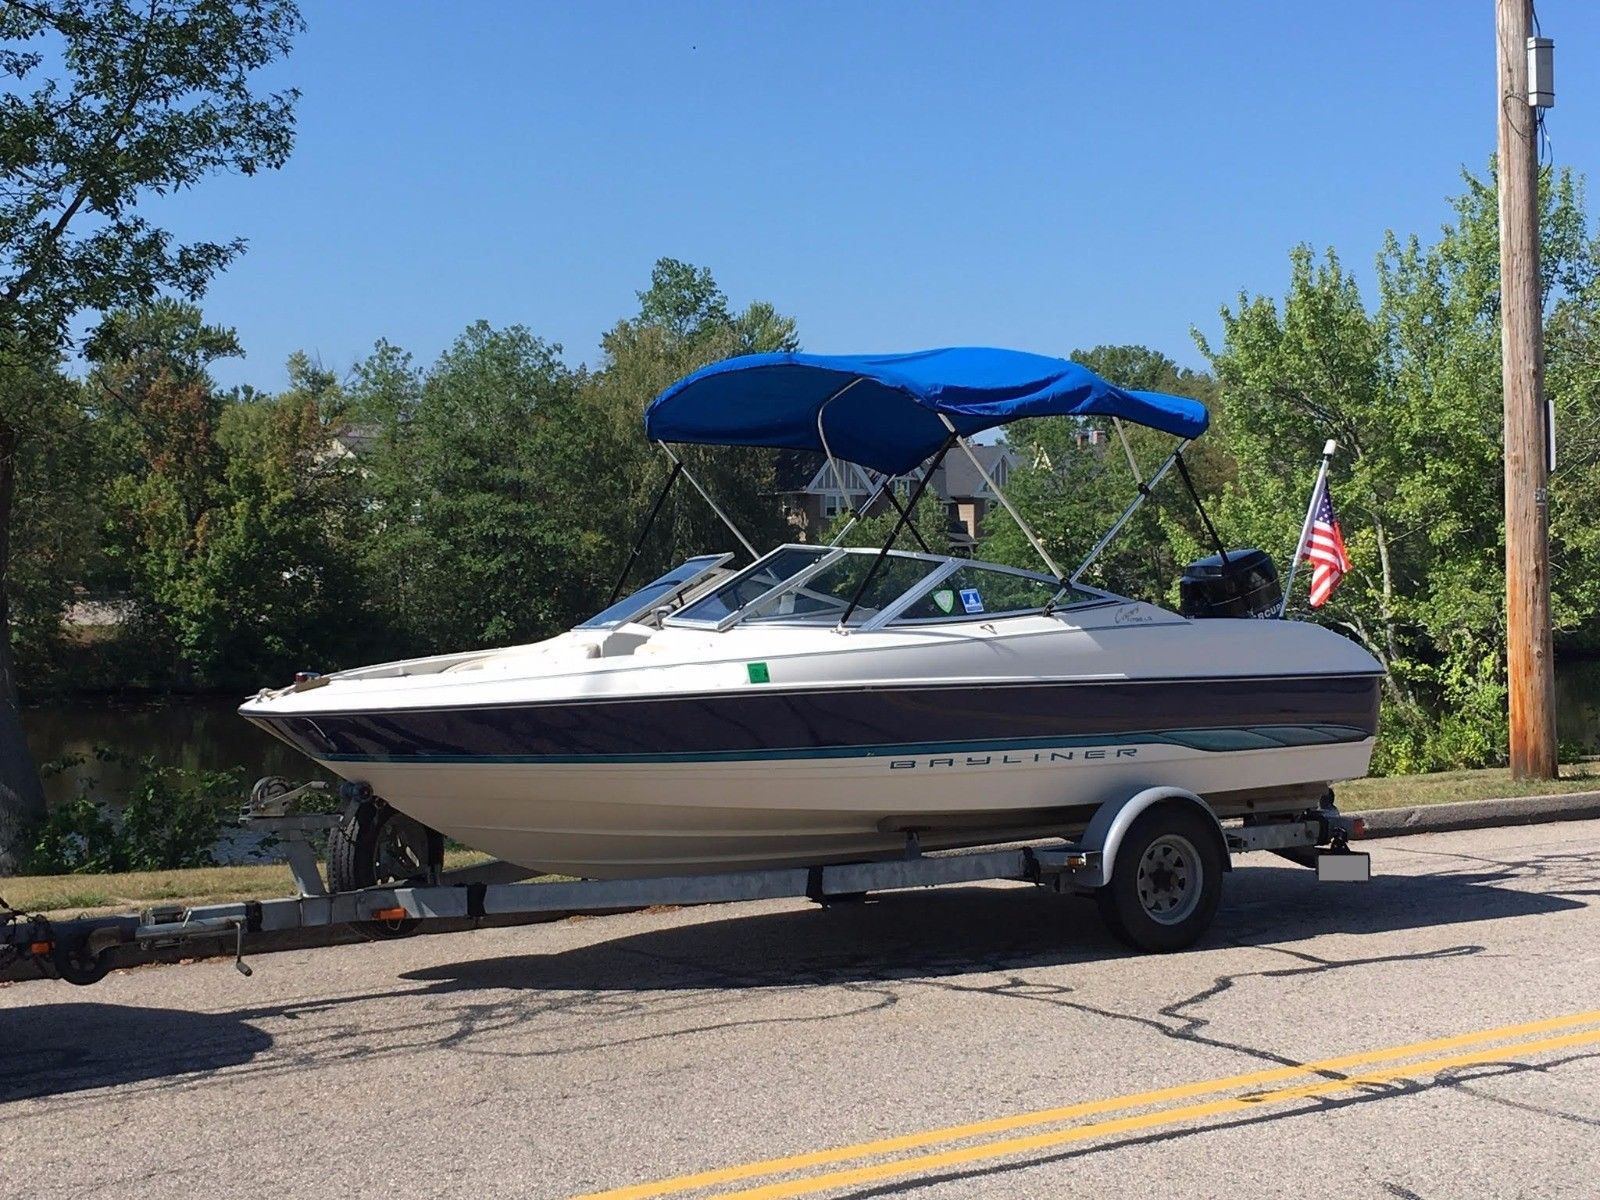 Bayliner 1995 for sale for $3,990 - Boats-from-USA.com